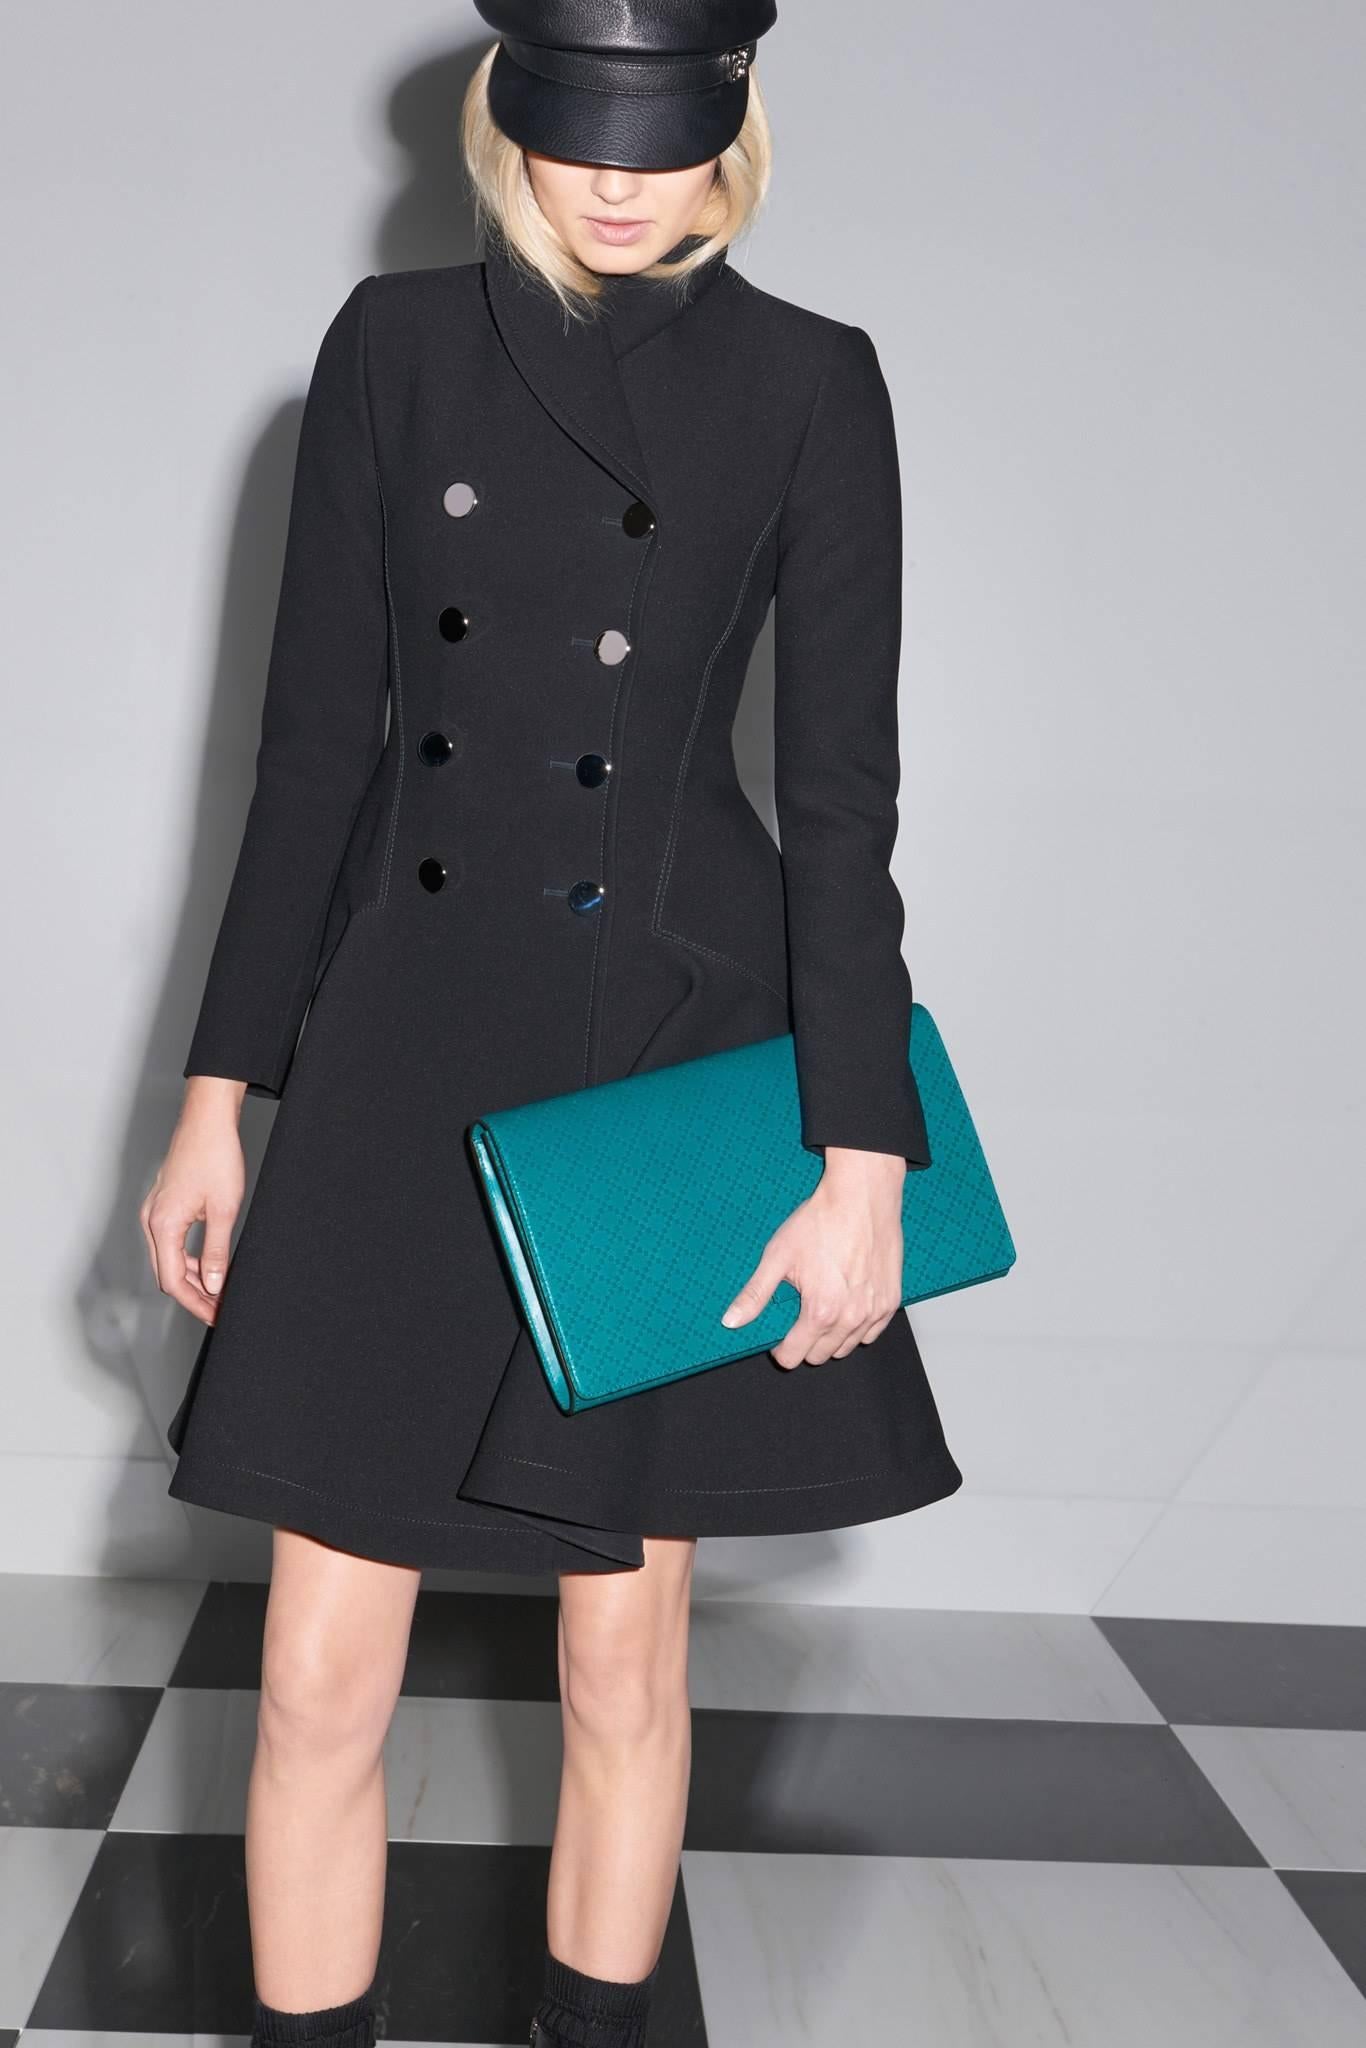 Gucci pre-fall 2014 Black Dress coat with Silver Buttons.  Rounded collar, double row of shiny silver metal buttons, seamed design, flared hem.  Fall weight dress coat and not a heavy winter weight. Tagged size IT 40 (USA 2/4).  Garment bust